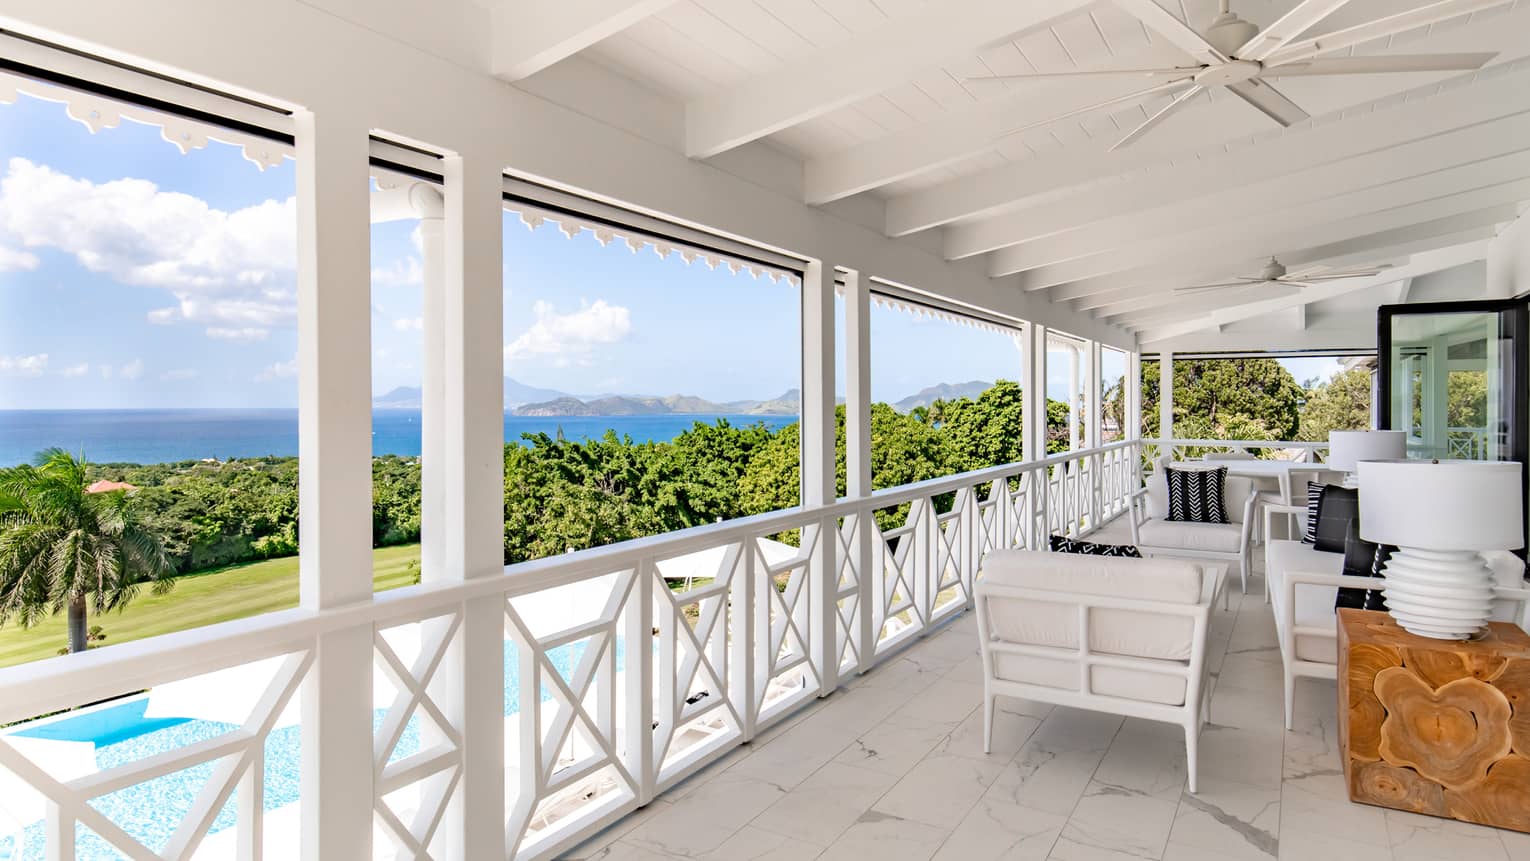 Covered terrace of a private home in Nevis, with pool and sea view